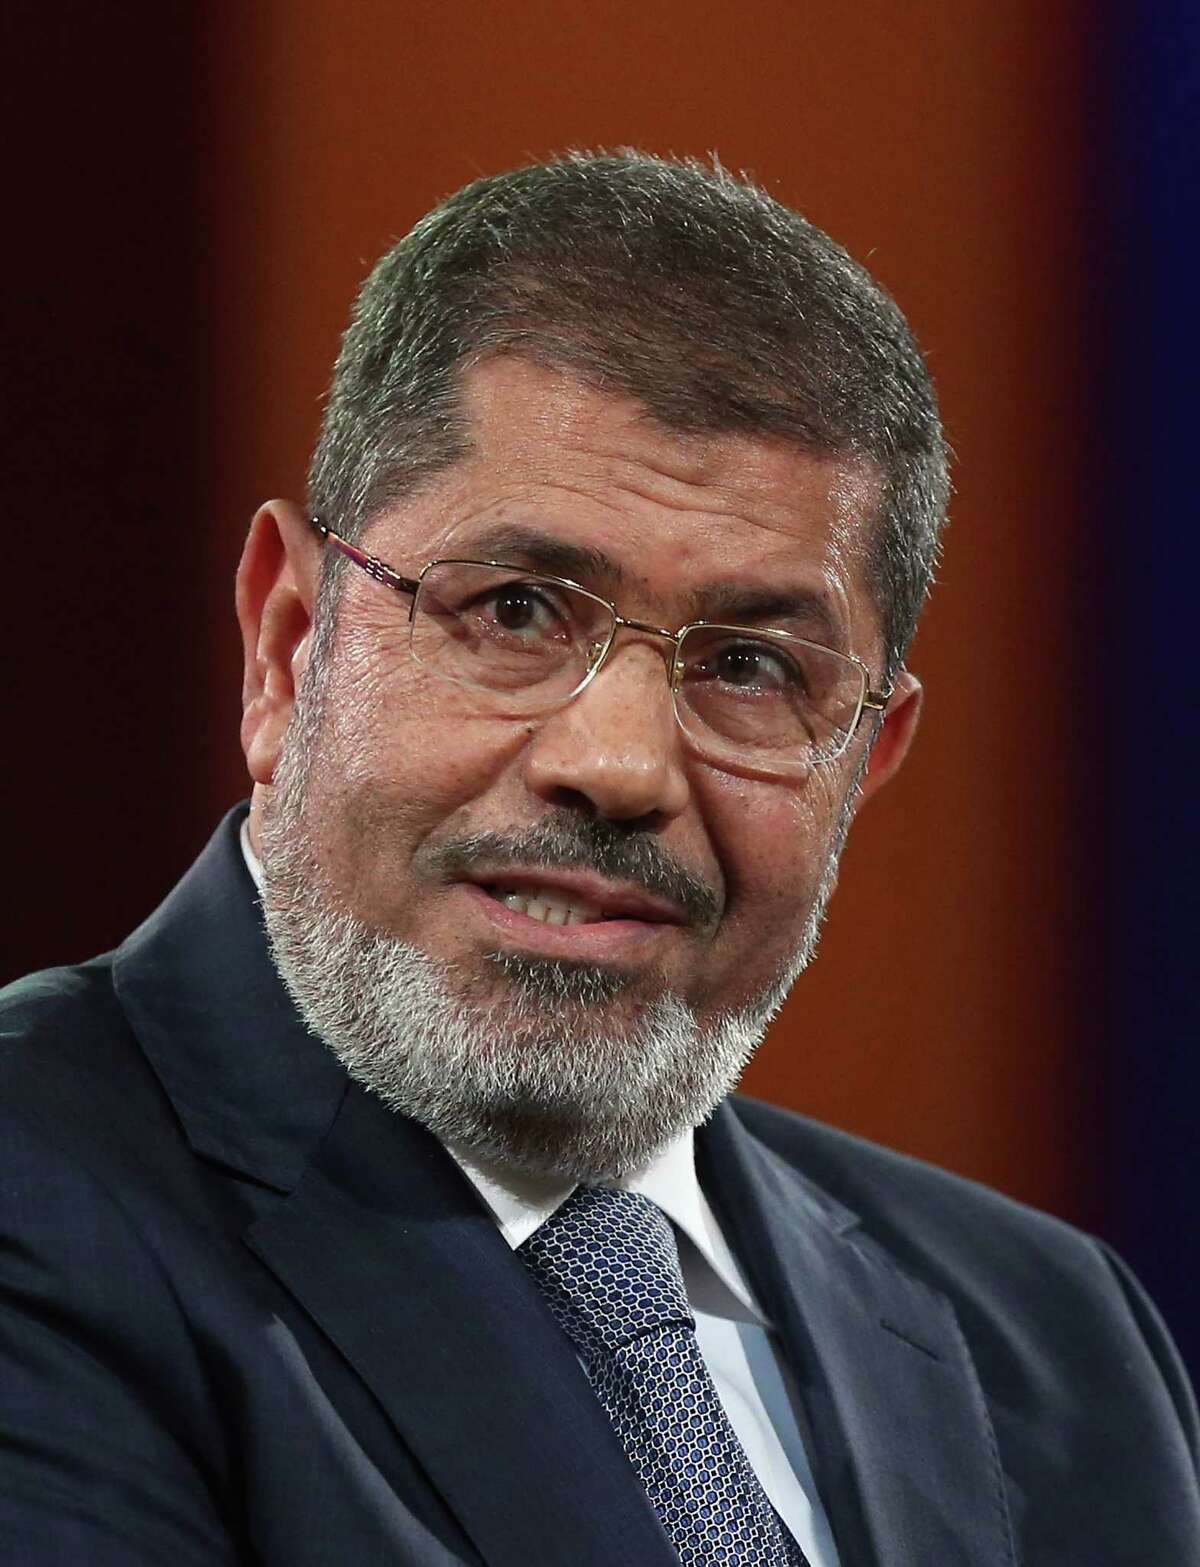 FILE - JUNE 17, 2019: According to state TV, ousted Egyptian President Mohammed Morsi has died at the age of 67 after fainting in a courtroom. NEW YORK, NY - SEPTEMBER 25: Egyptian President Mohamed Morsi speaks at the Clinton Global Initiative meeting on September 25, 2012 in New York City. Timed to coincide with the United Nations General Assembly, CGI brings together heads of state, CEOs, philanthropists and others to help find solutions to the world's major problems. (Photo by Mario Tama/Getty Images)